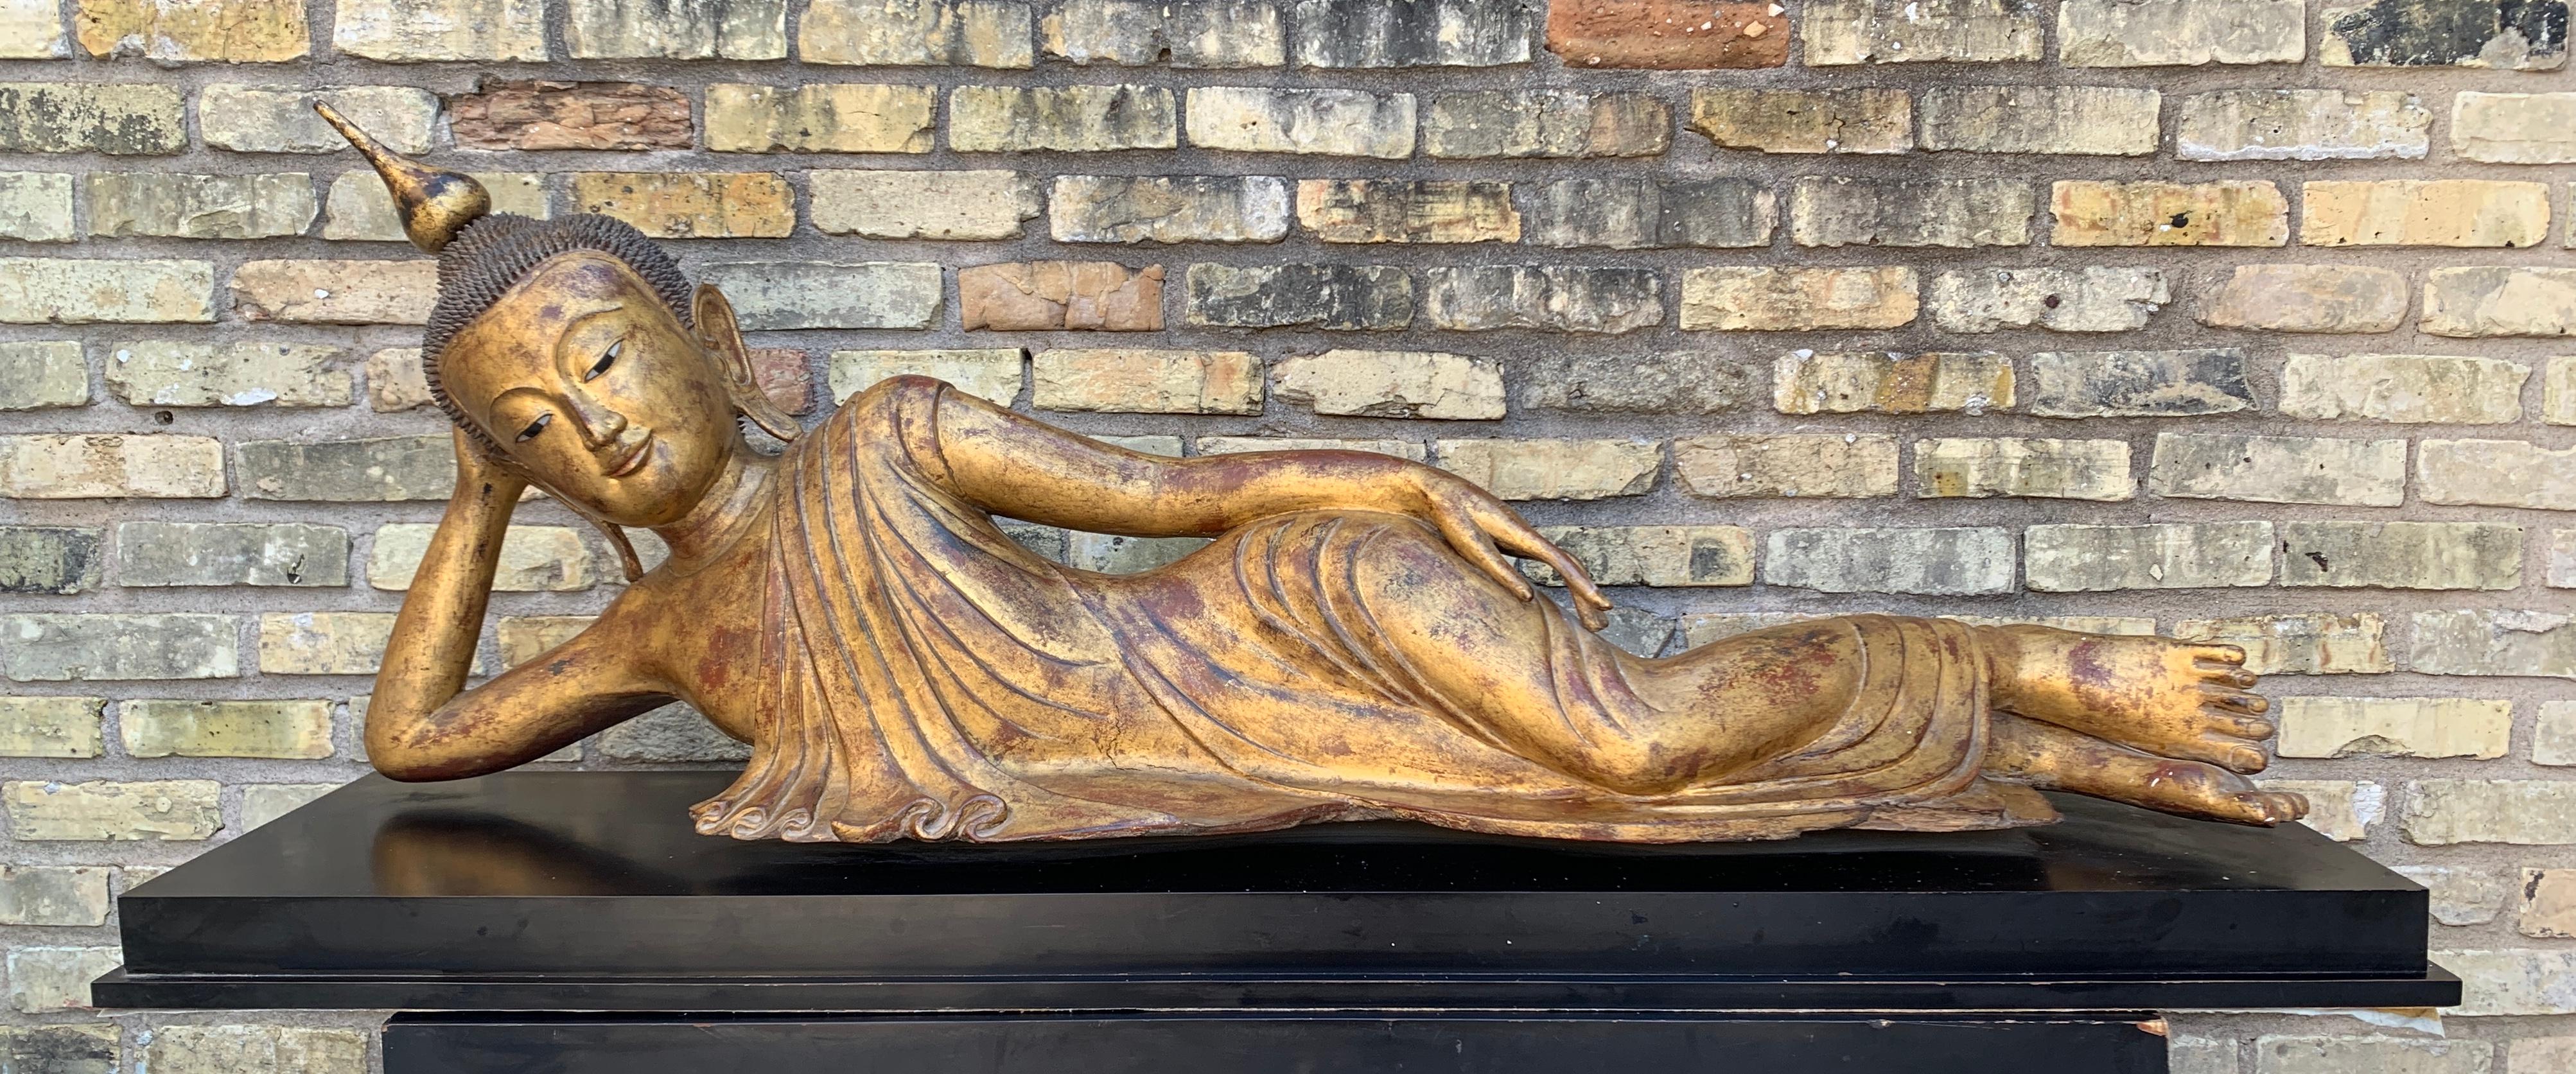 A large, near life-sized Burmese sculpture of the reclining Buddha, carved, lacquered and gilt teak wood, Shan States, Myanmar (Burma), early 20th century.

The Buddha is portrayed reclining languidly, almost seductively, on his side. His head